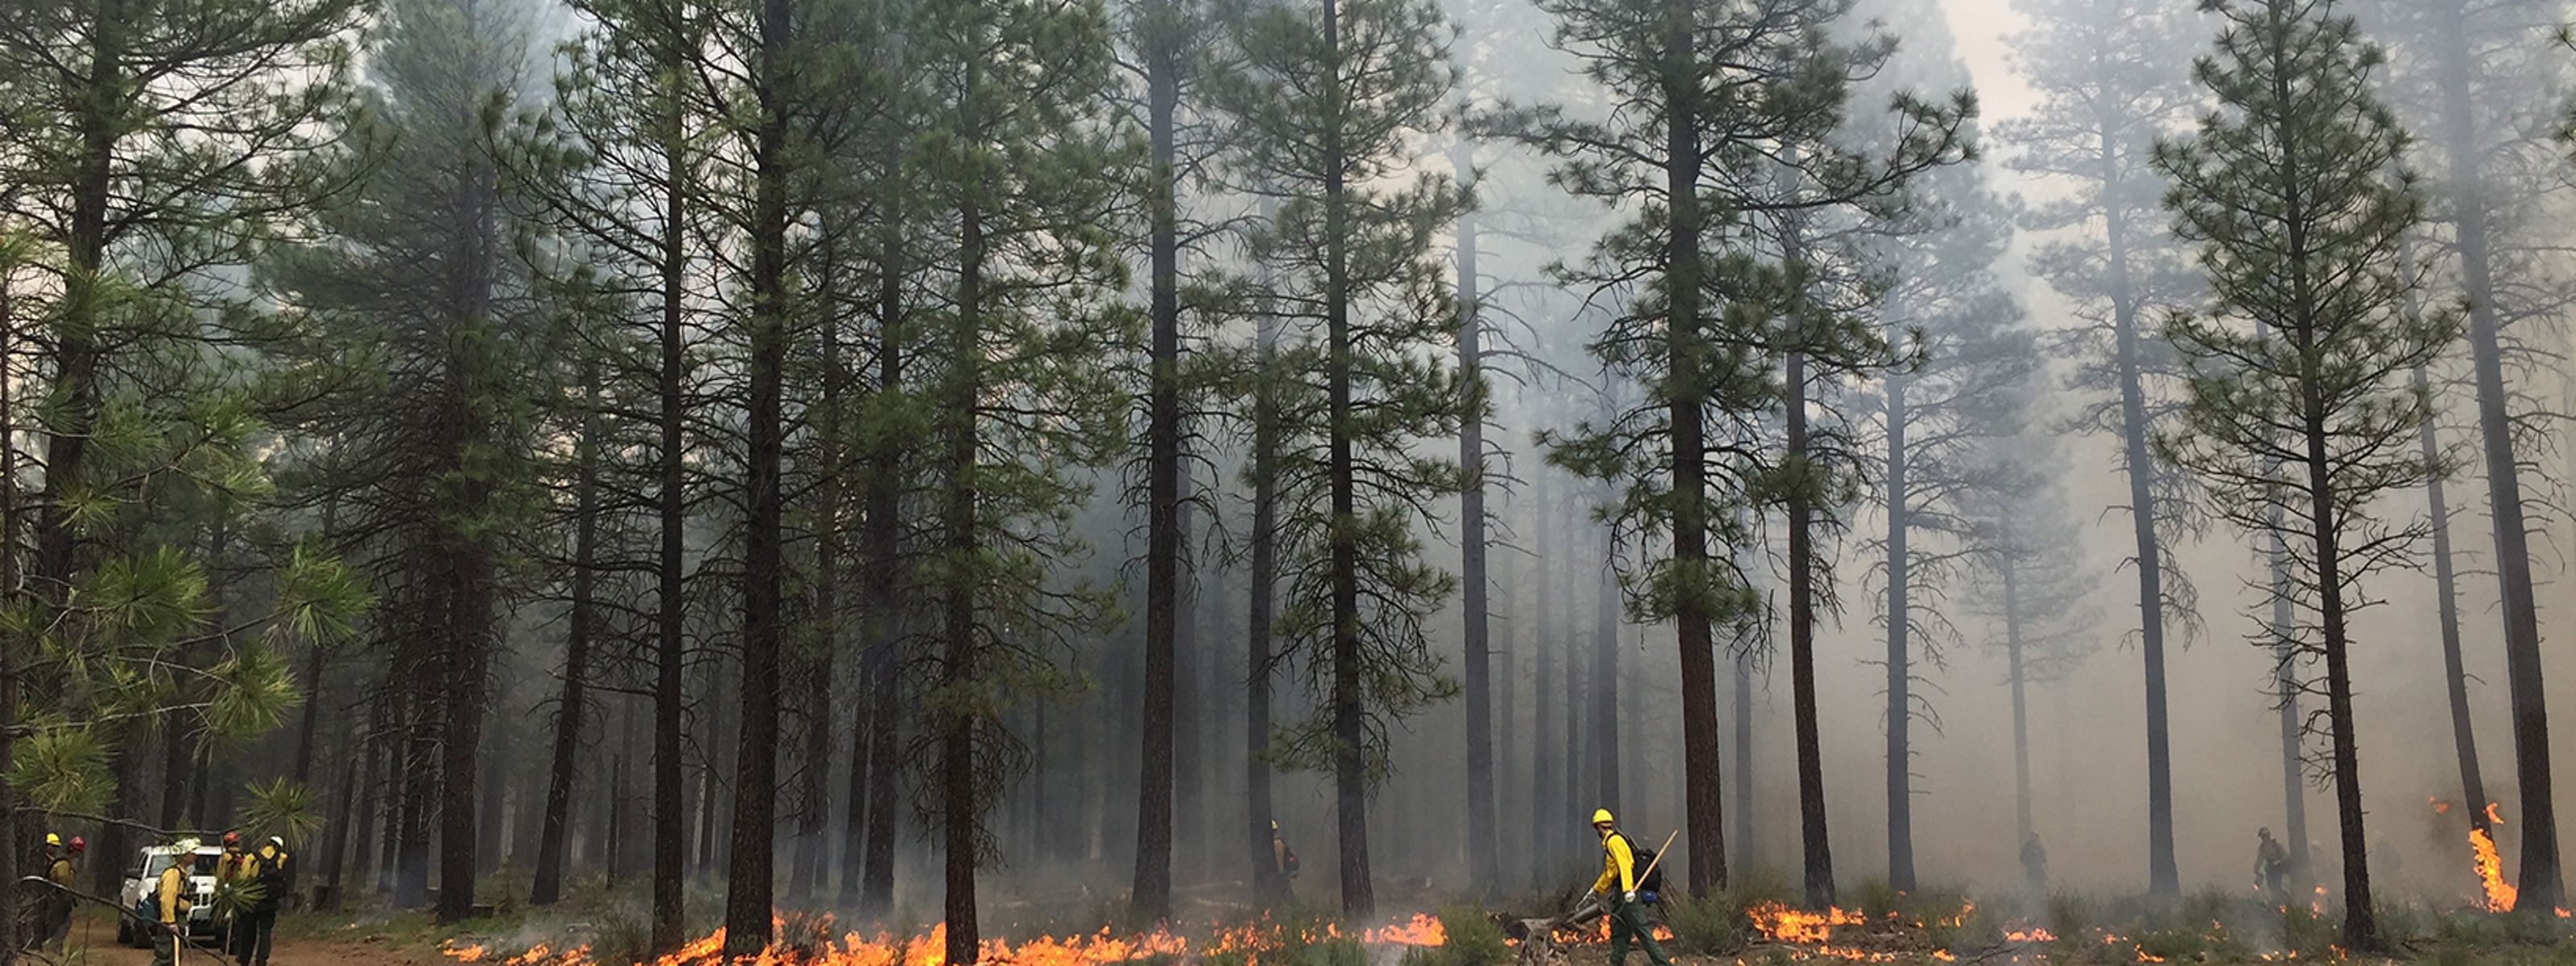 A low intensity fire burns in a forest at the base of tall pine trees. People walk through the forest monitoring the controlled burn.